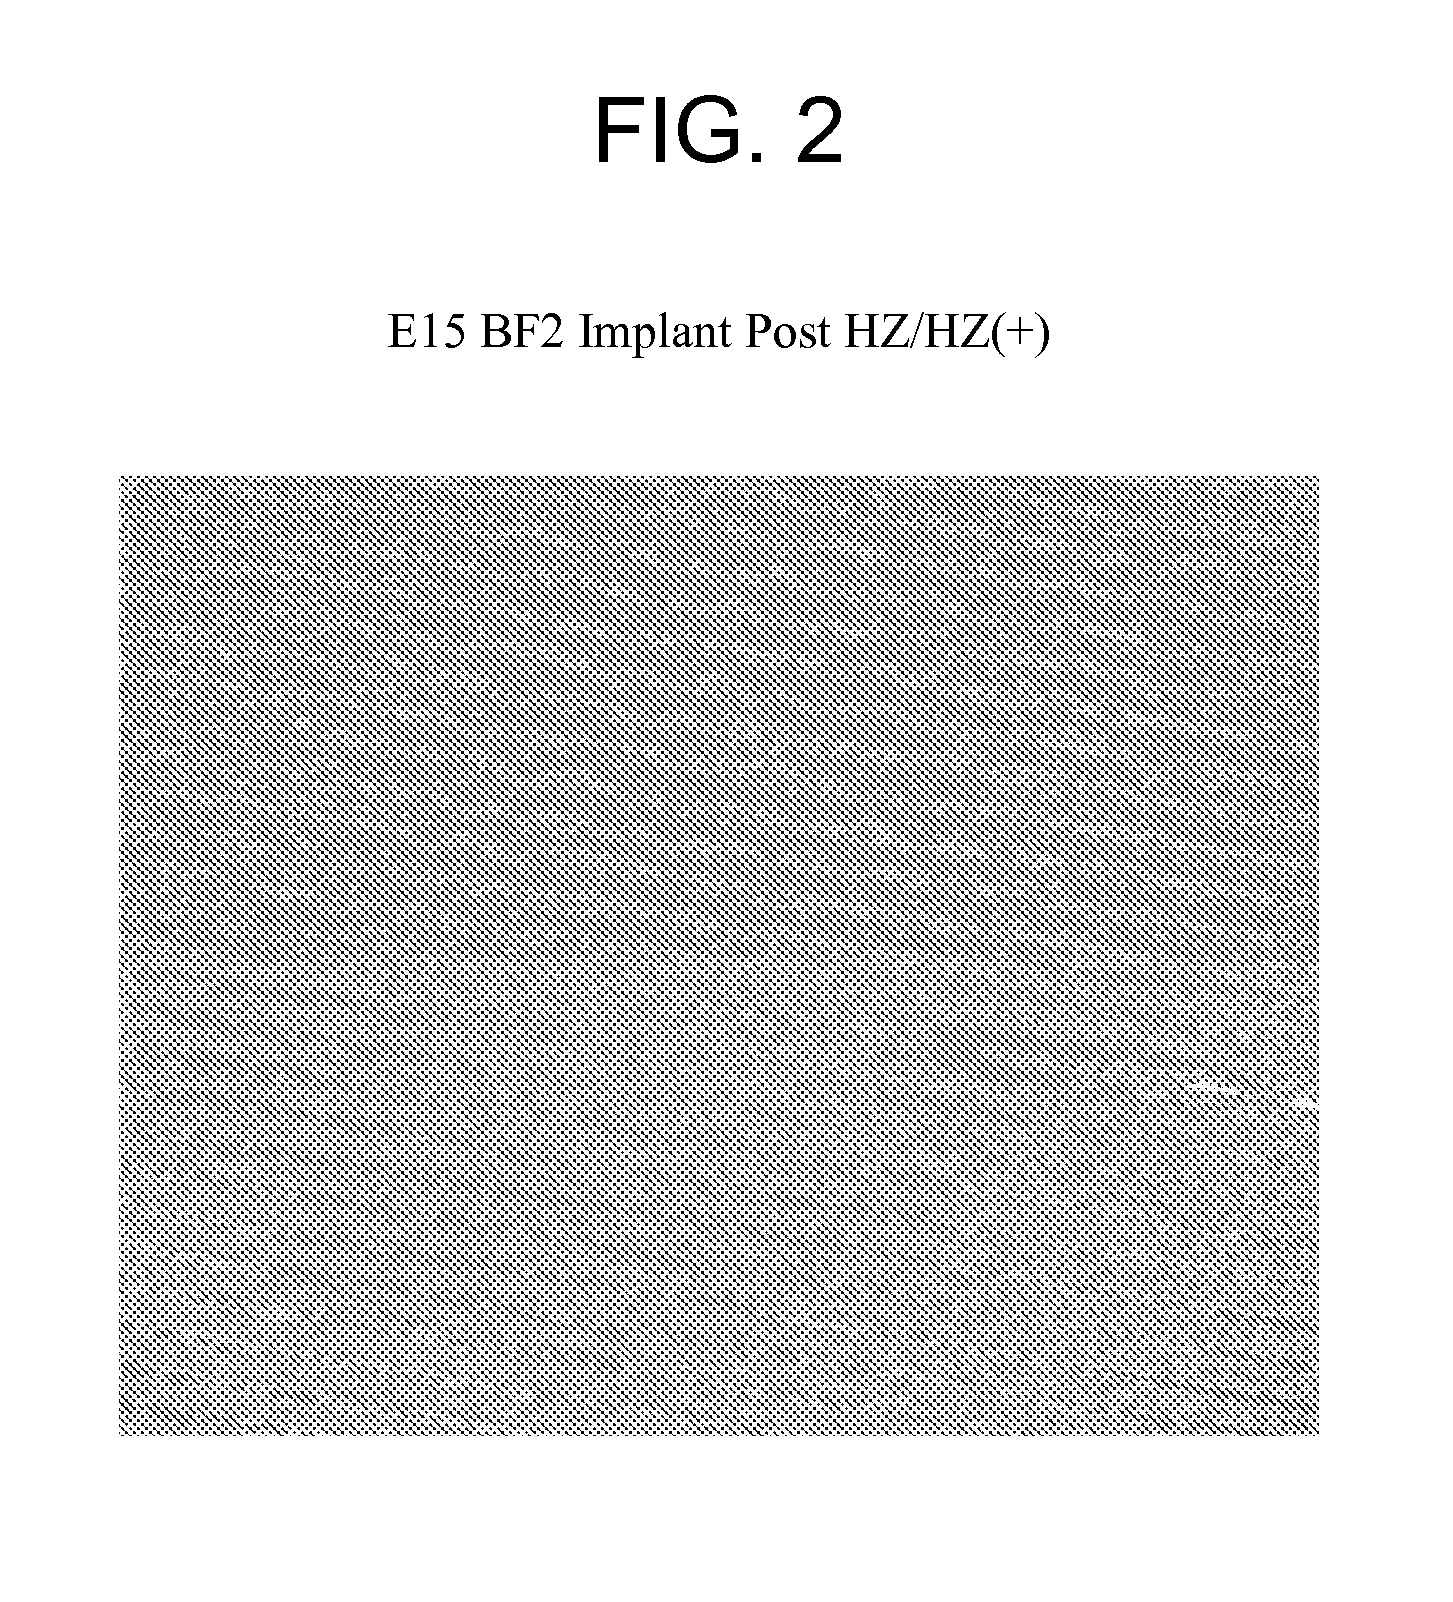 Methods for removing photoresist